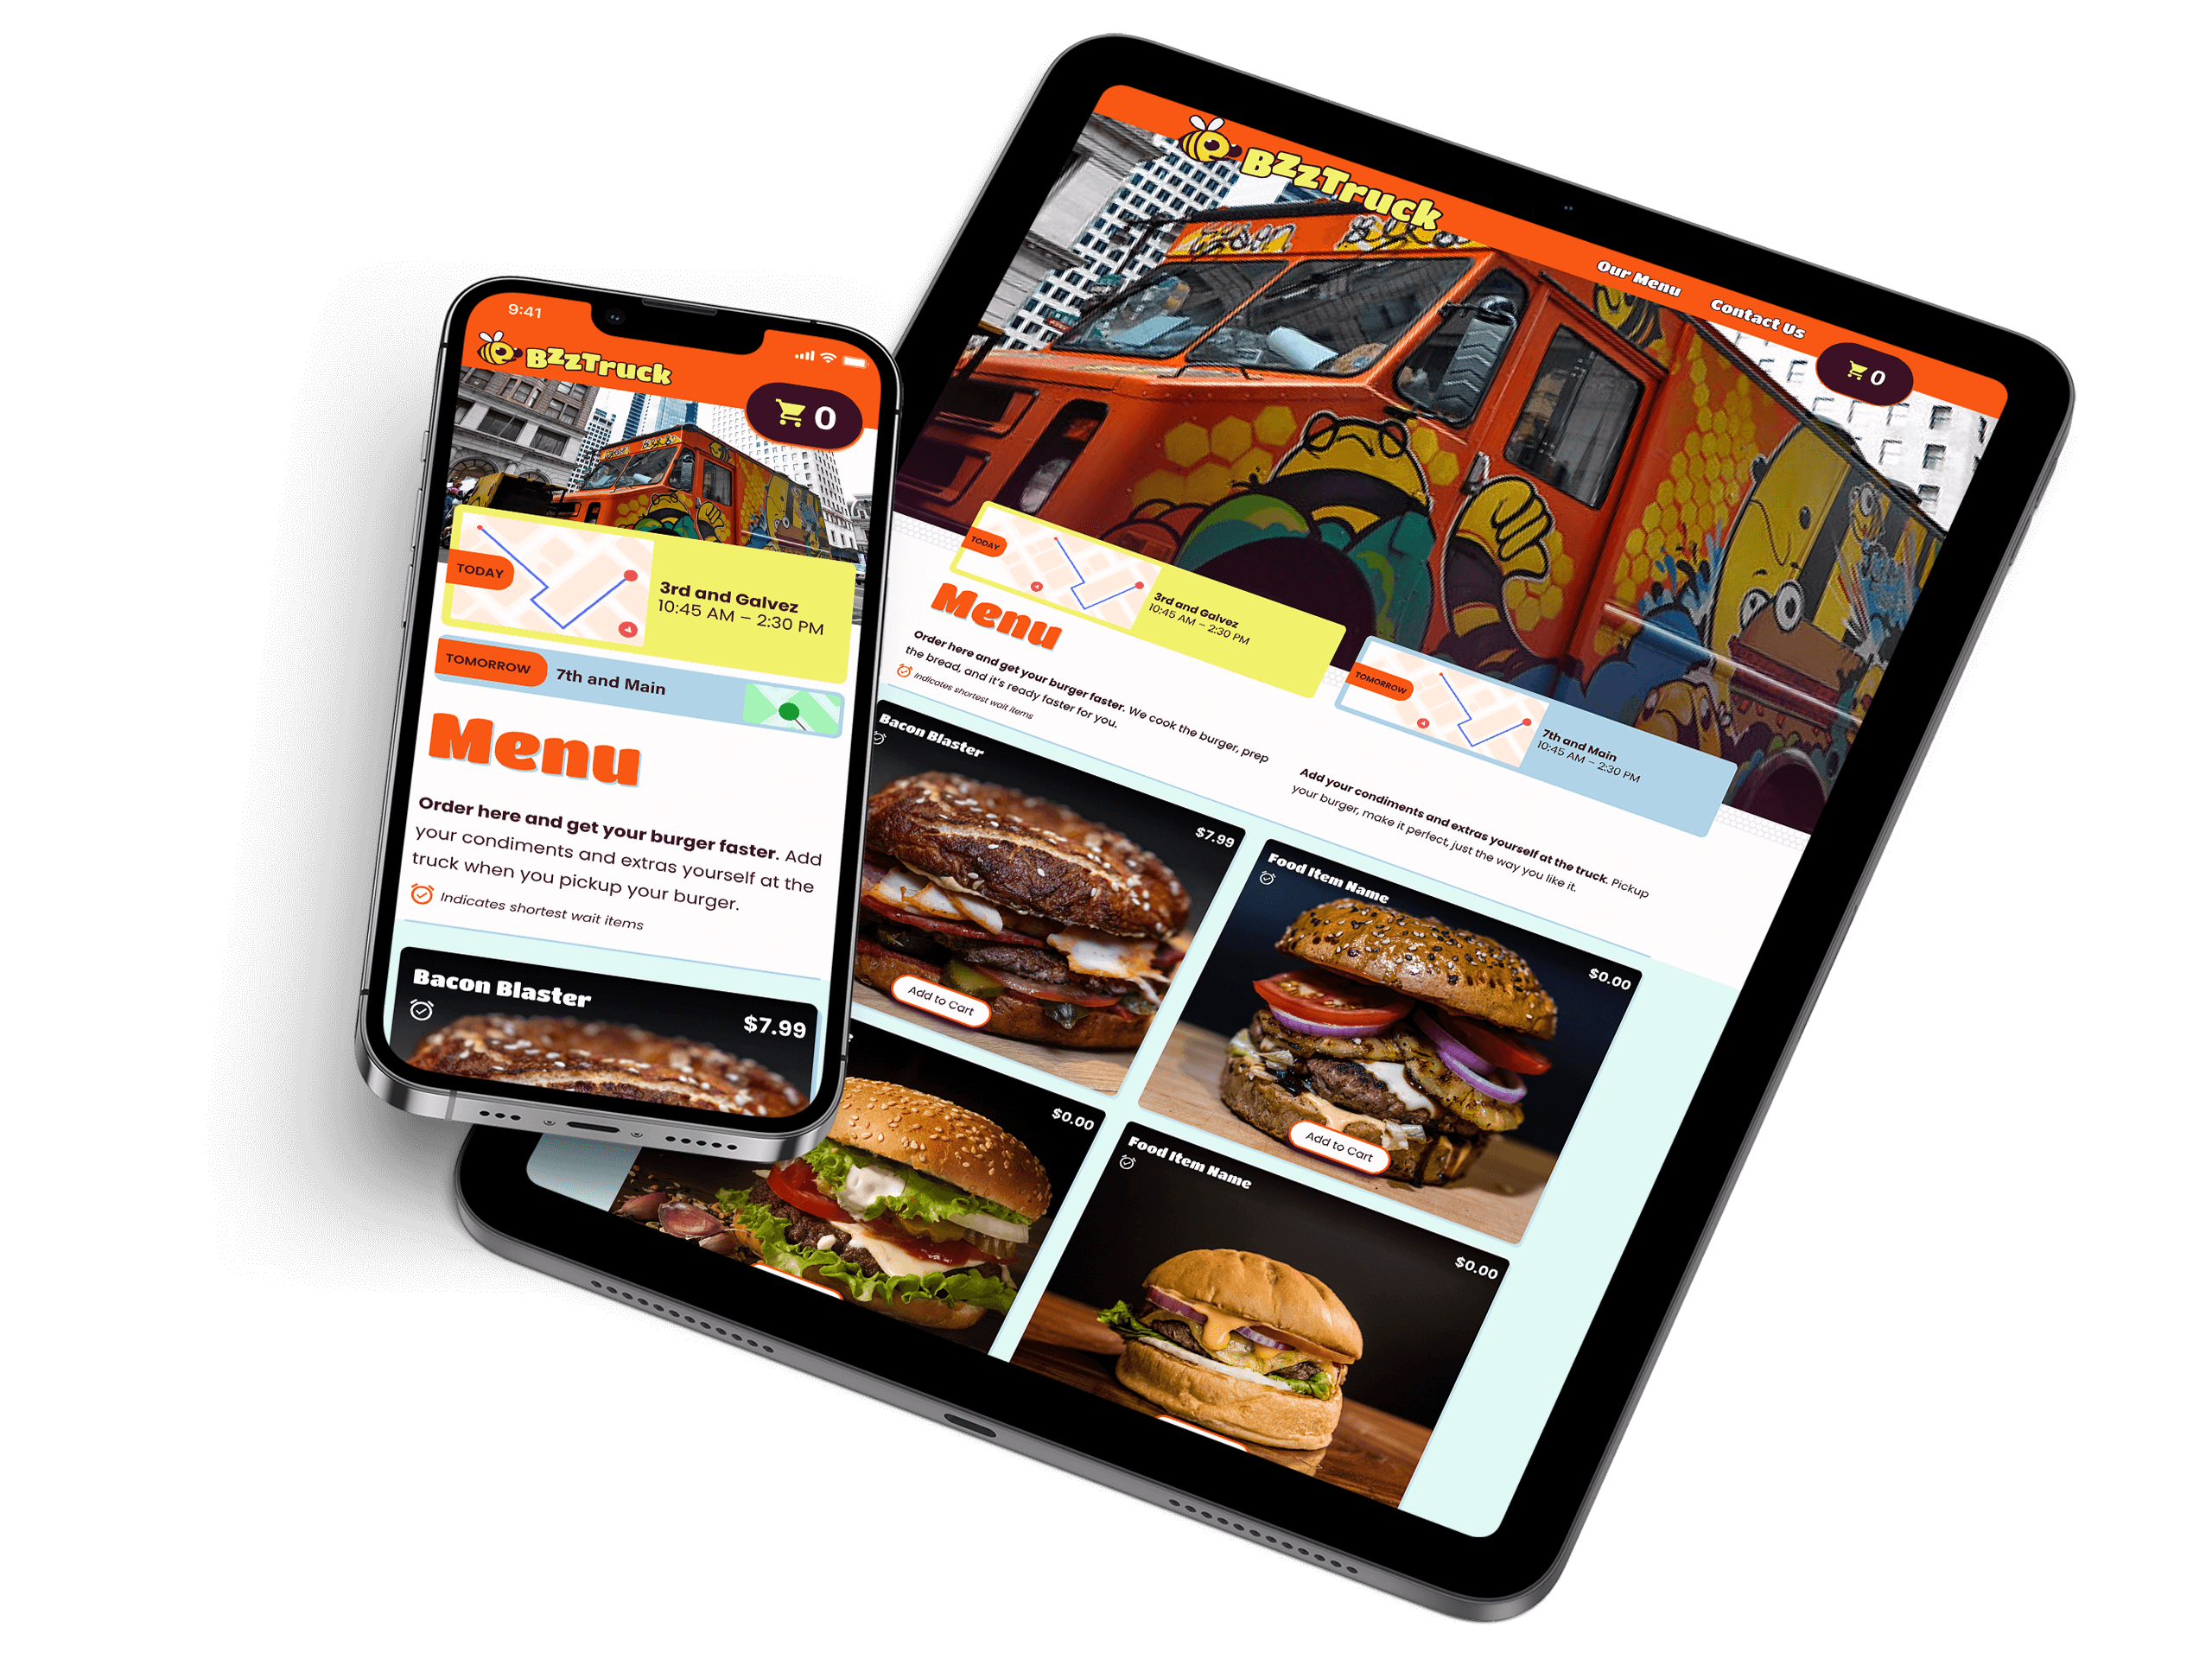 Preview image for Food Truck Site.